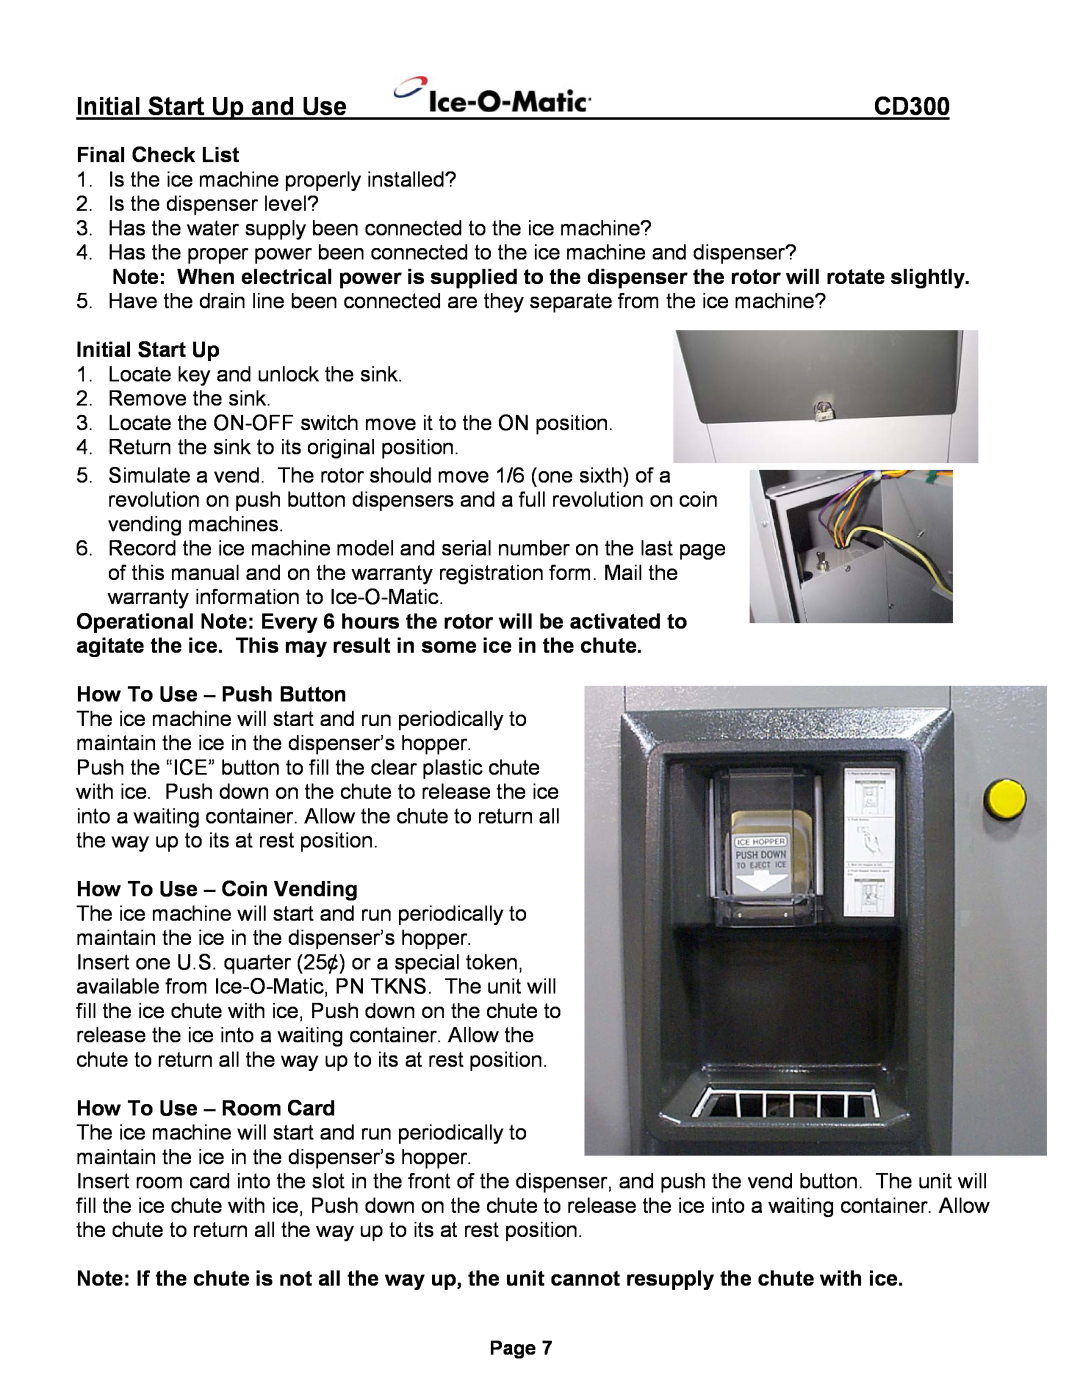 Ice-O-Matic CD300 Initial Start Up and Use, Final Check List, How To Use - Push Button, How To Use – Coin Vending 